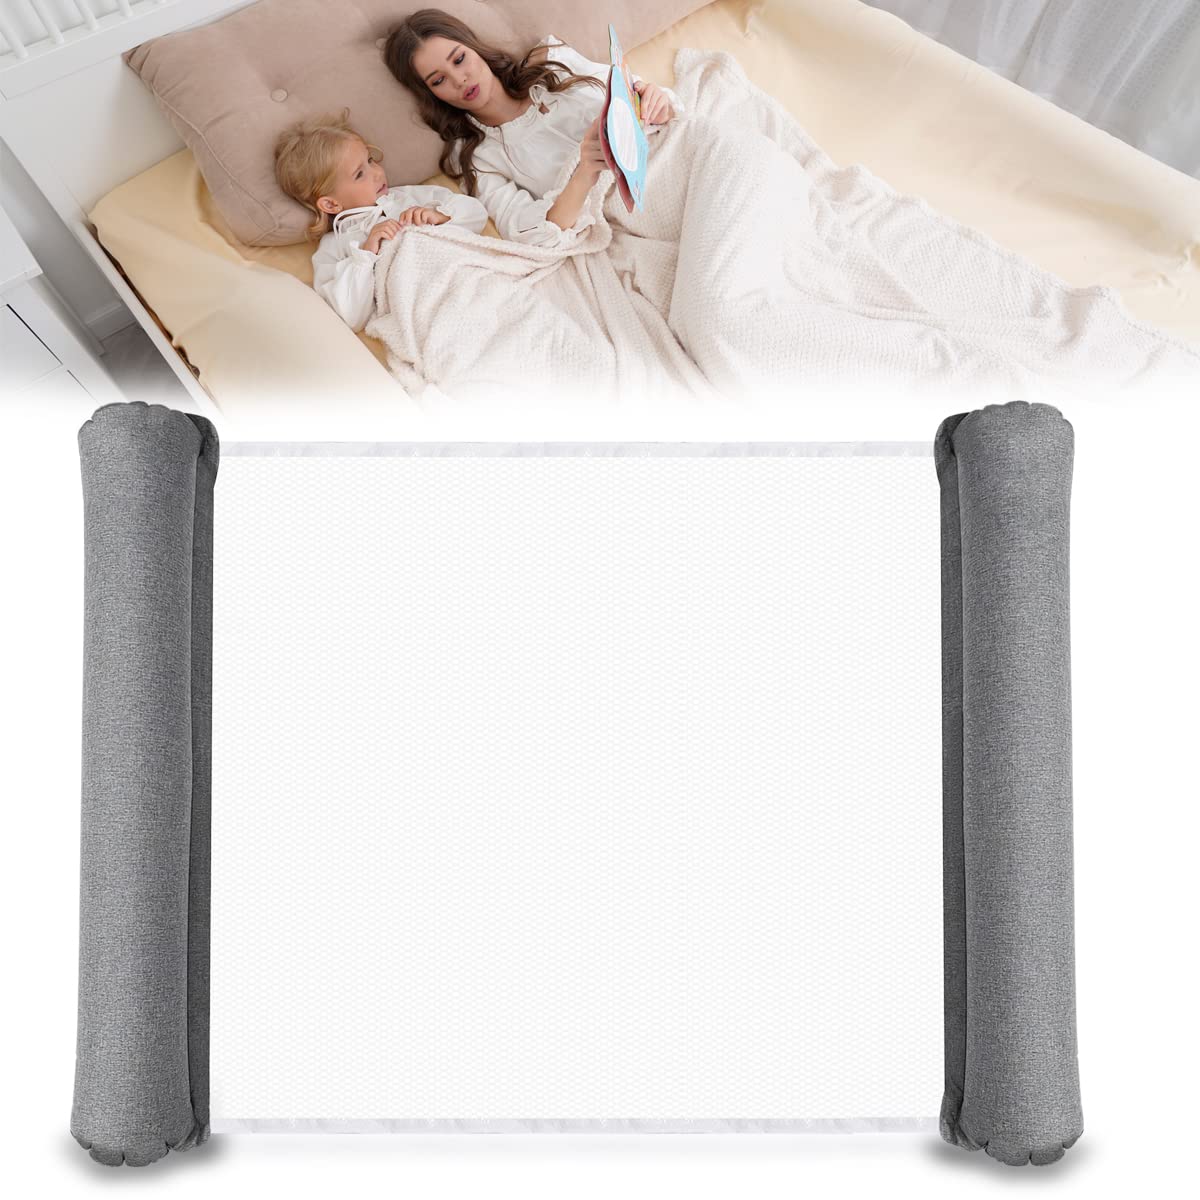 Inflatable Bed Rails